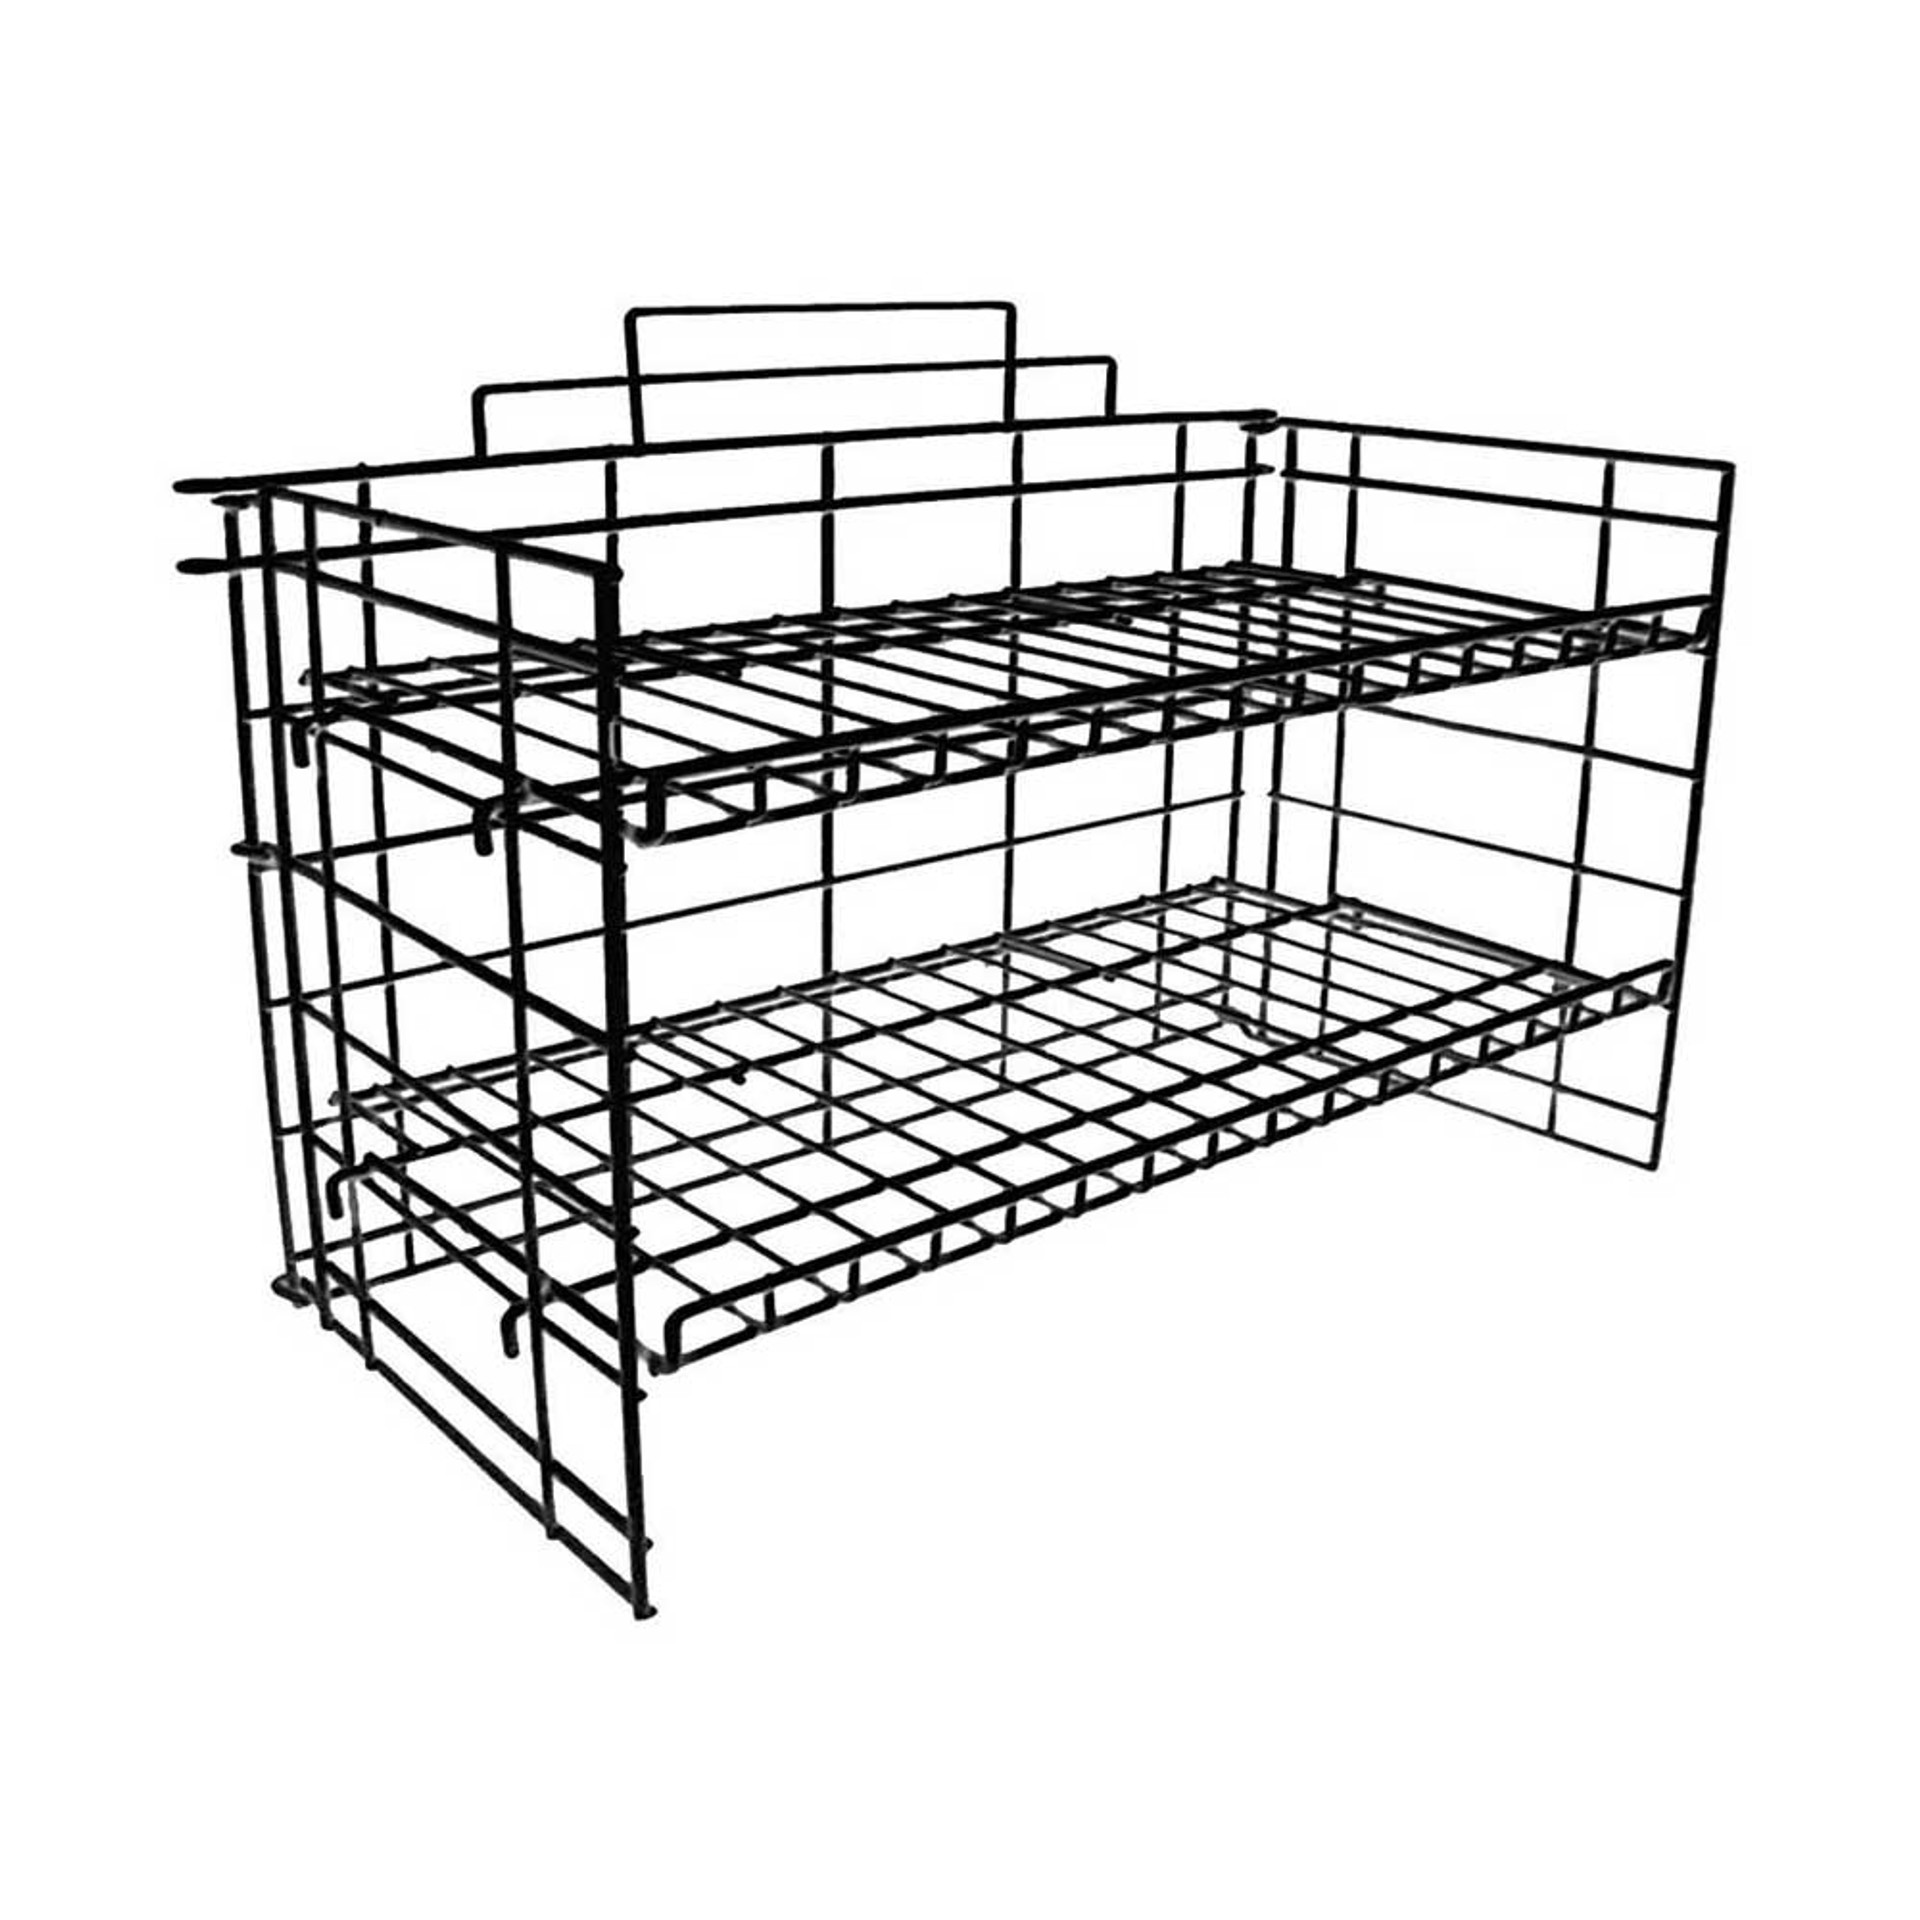 Countertop Grid Unit With Legs Black - The Fixture Zone